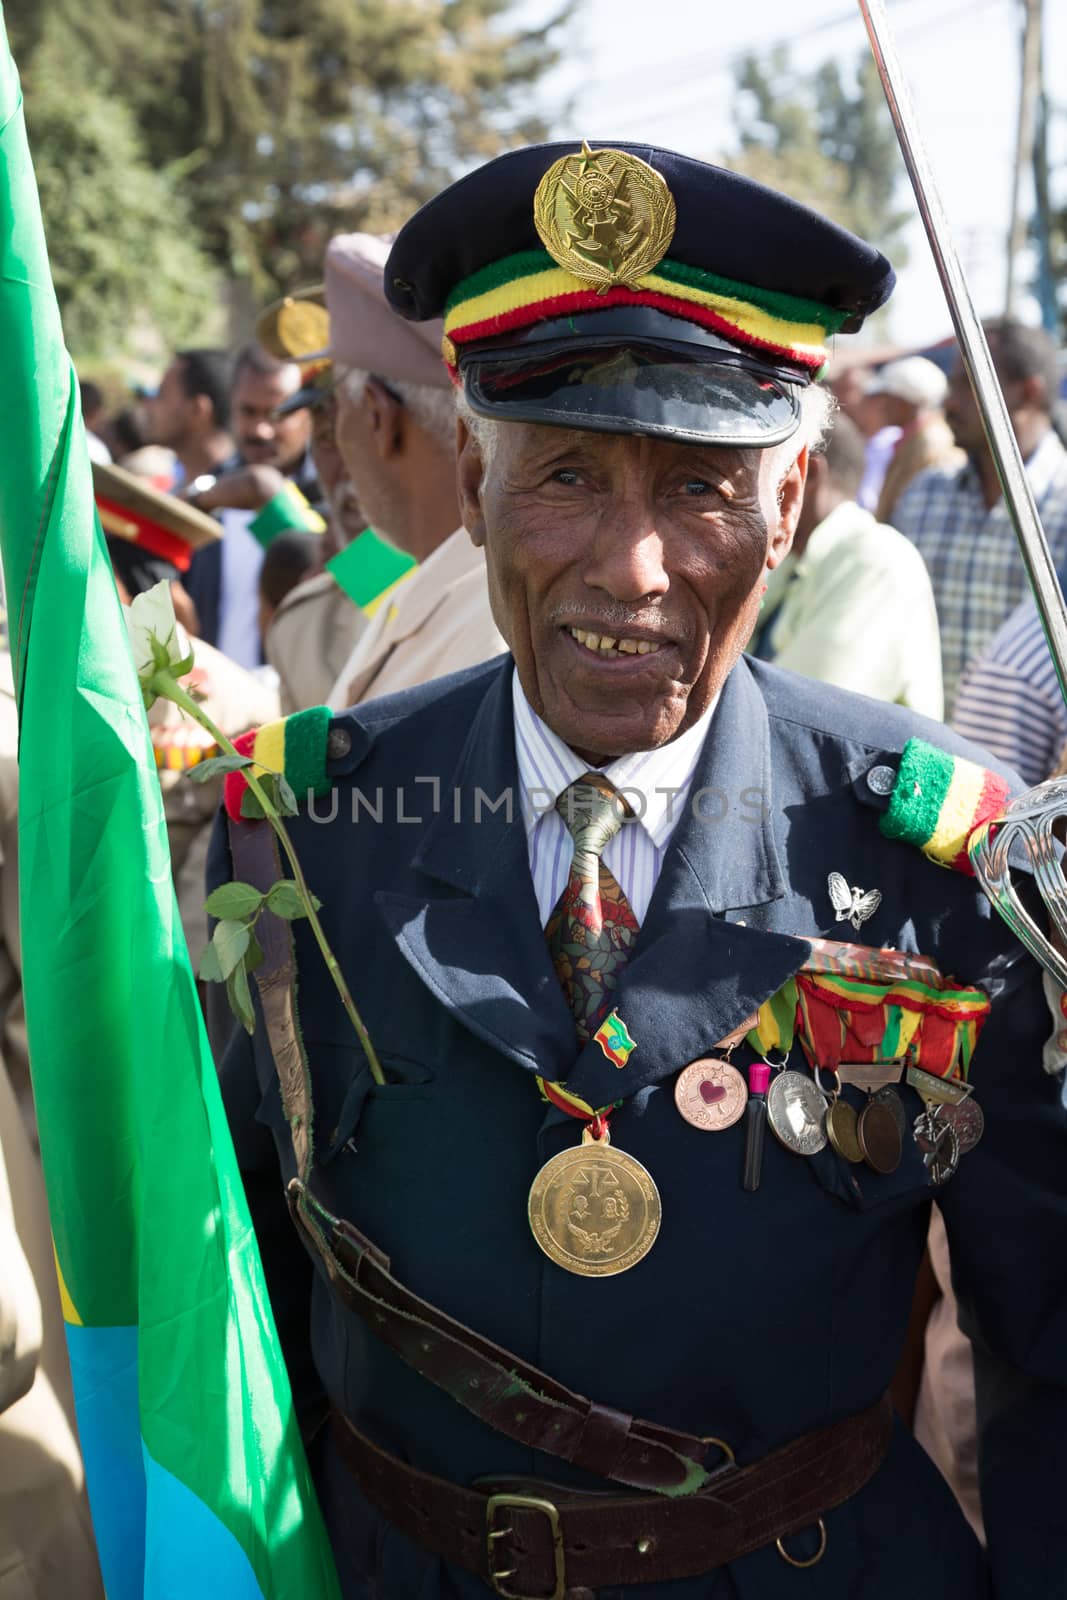 A war veteran with medals celebrates the 119th Anniversary of Ad by derejeb